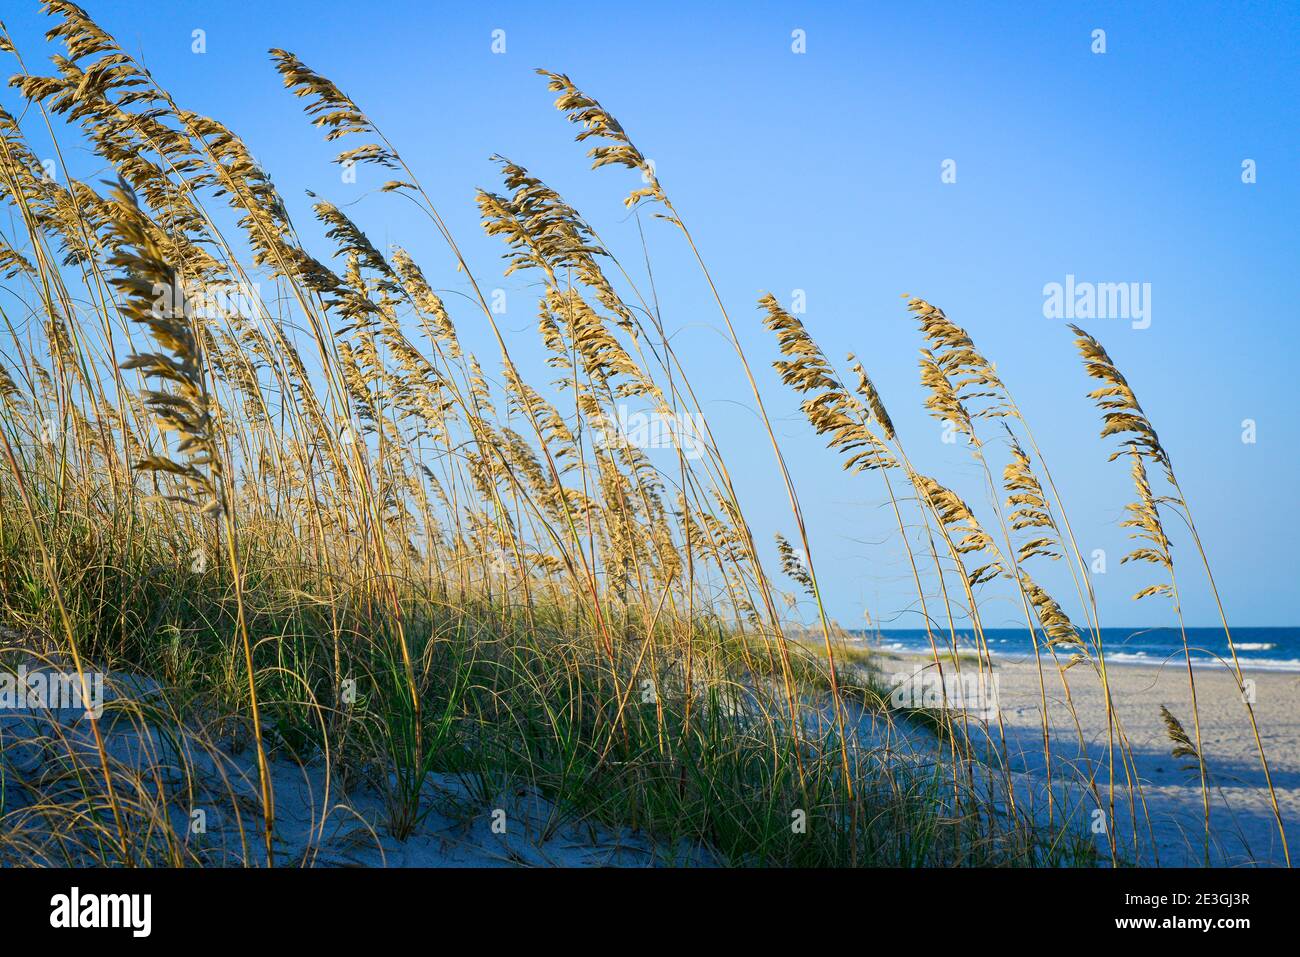 A serene view of sea grass covering the dunes in foreground with a distant Atlantic Ocean on Fernandina Beach, on Amelia Island, FL Stock Photo